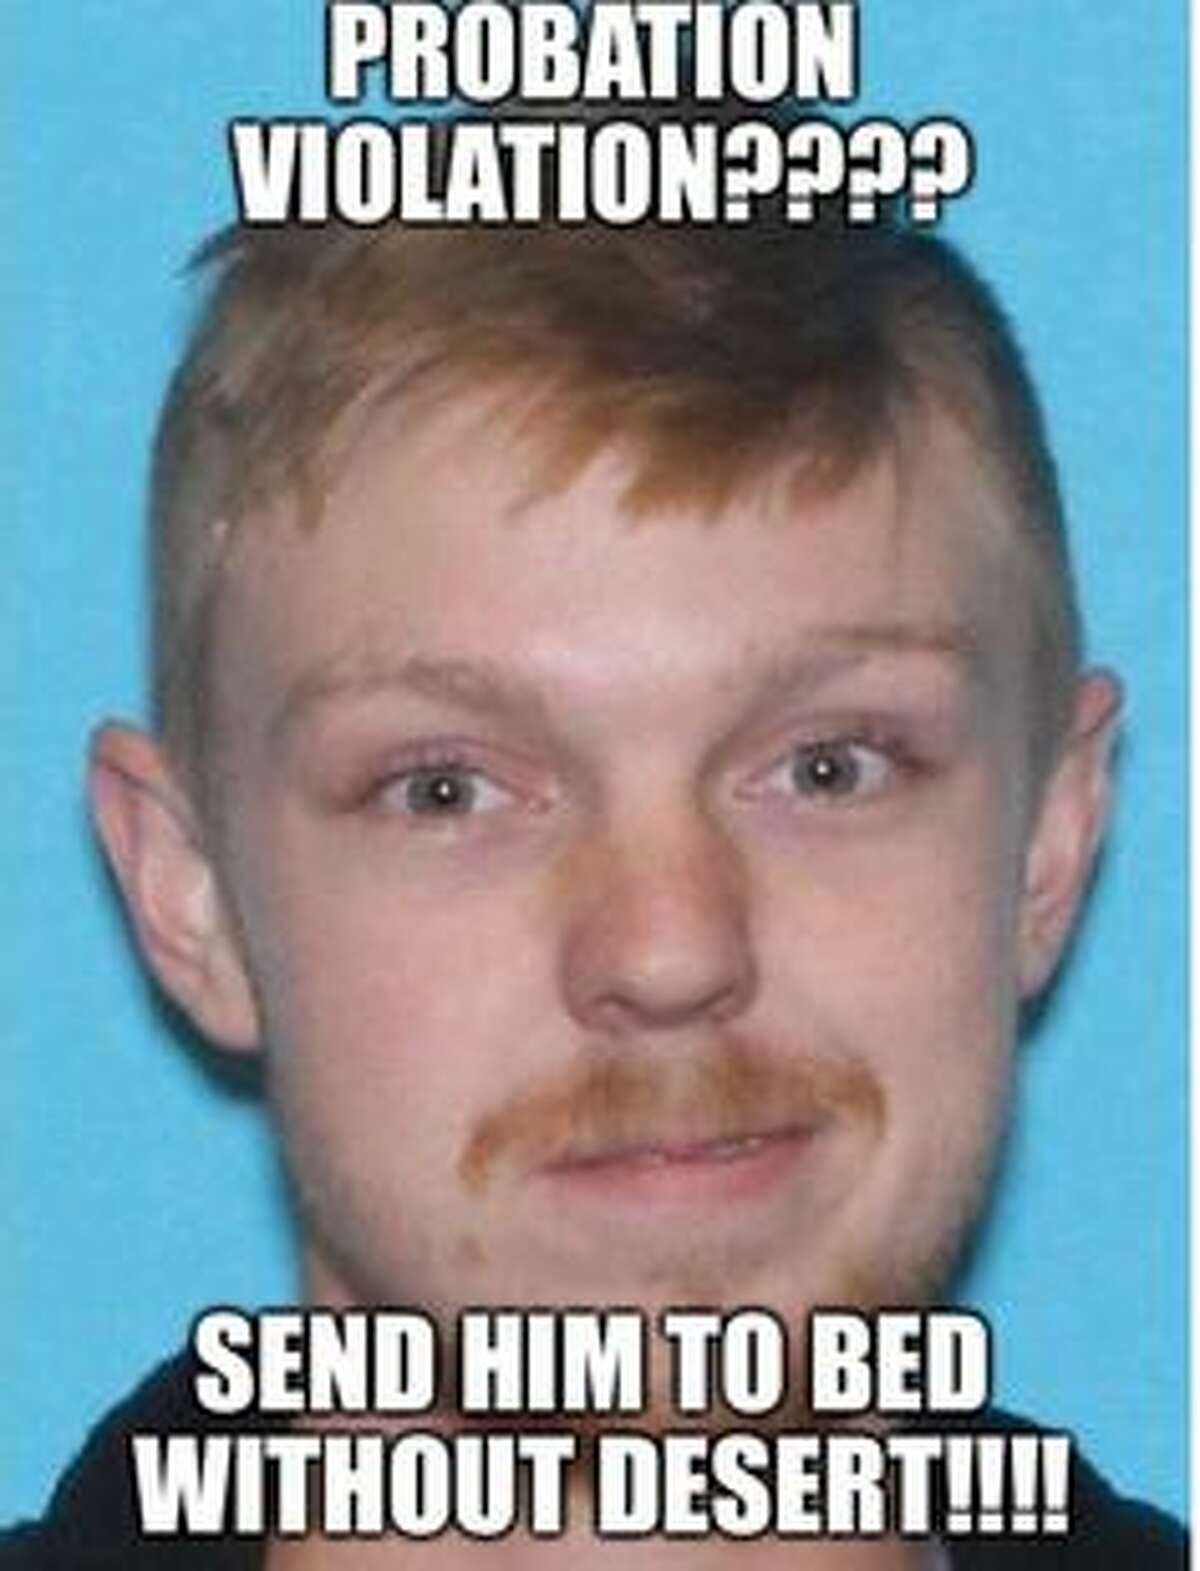 Ethan Couch's "affluenza" defense has sparked Internet memes such as this one, as seen on Pinterest.